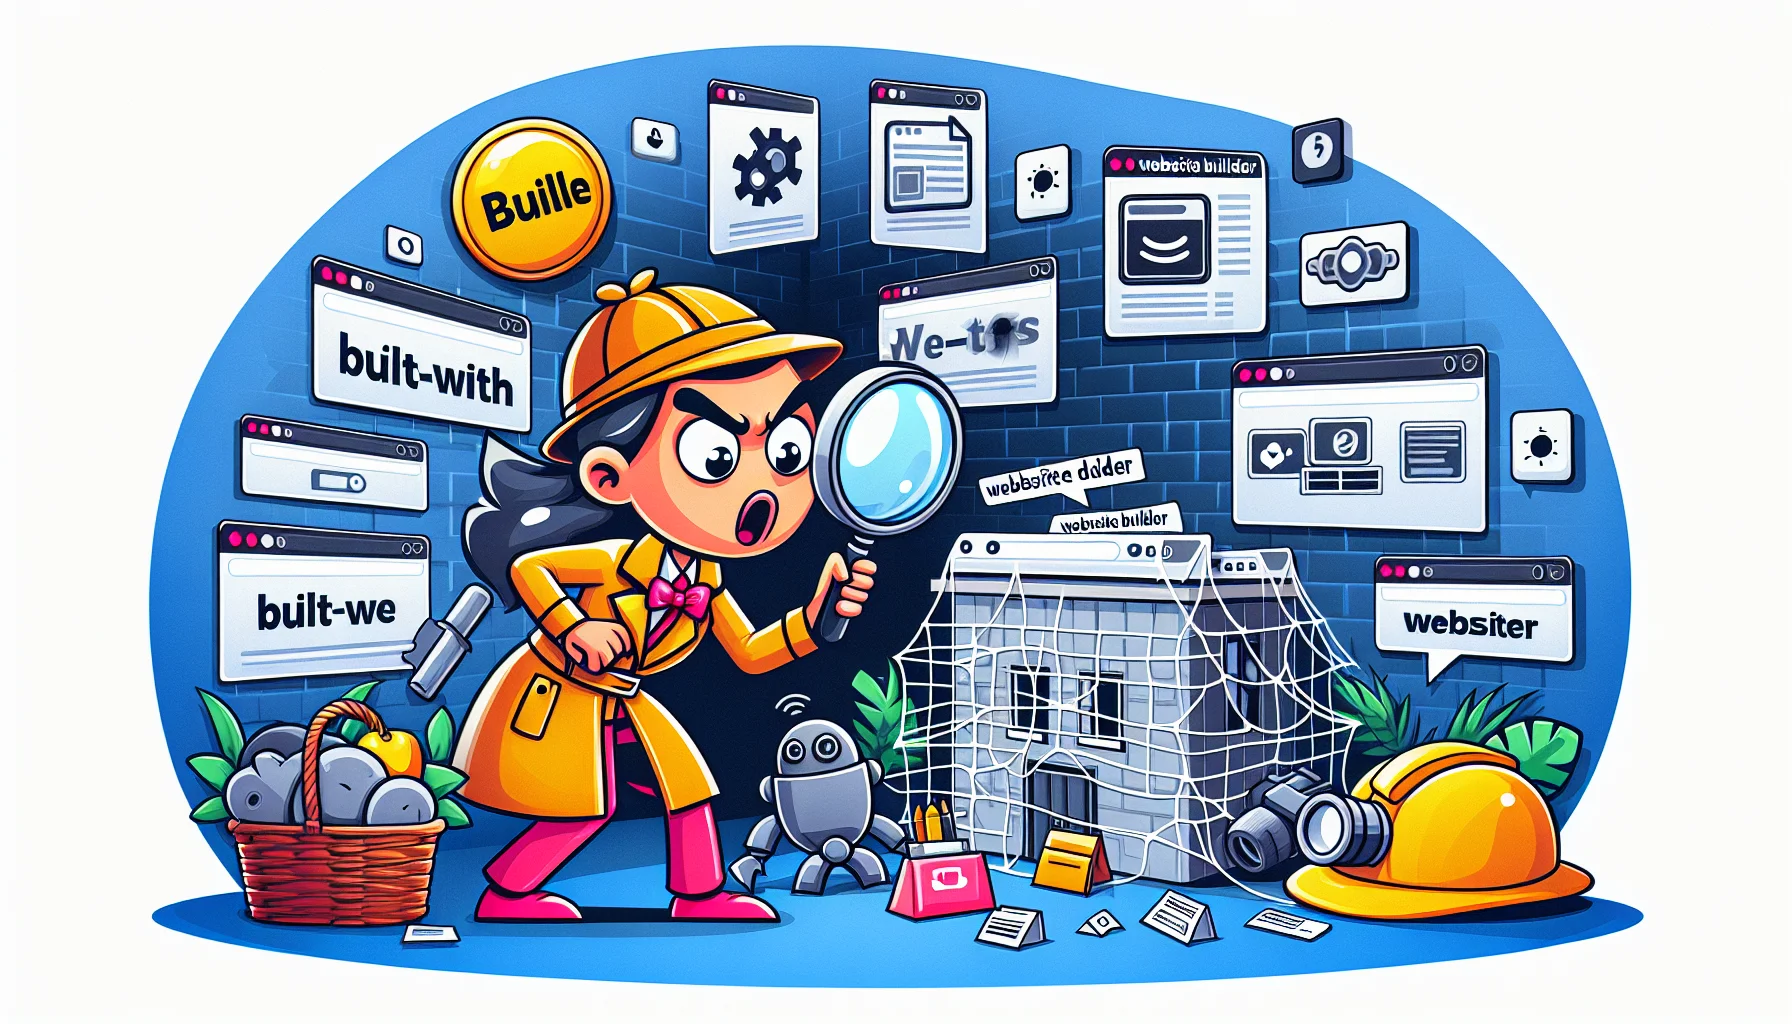 Illustrate a humorous scenario that depicts a detective-themed, animated character exploring various website elements to uncover the mystery of the website builder used to construct it. She is surrounded by tell-tale signs like a built-with logo and website templates hidden in corners, where she uses ingenious tools - maybe a magnifying glass or a web-spidery robot. The entire scene is set in a room designed to resemble cyberspace, peppered with symbols representing popular website builders. Add an air of fun and excitement to appeal to web hosting enthusiasts.